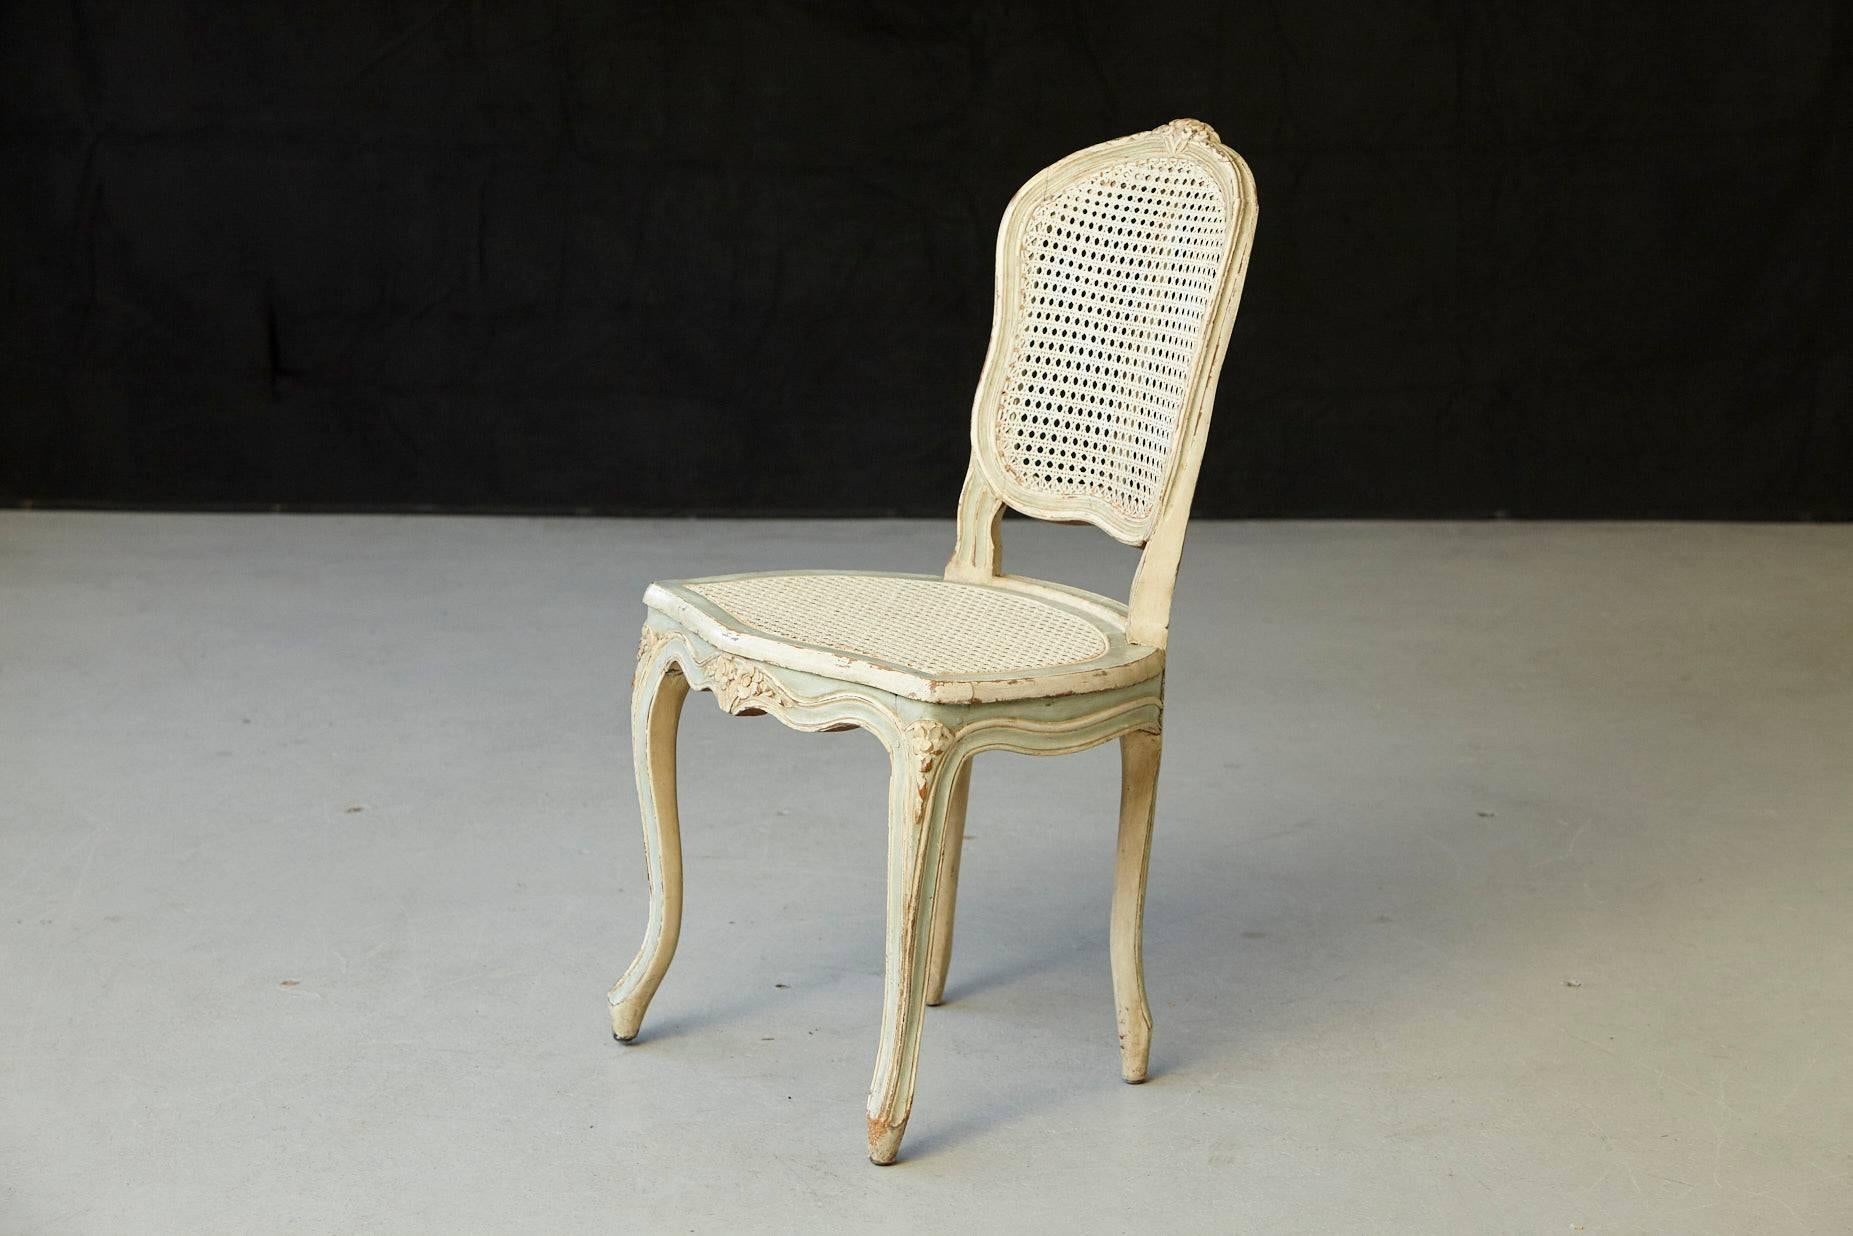 Lovely 19th century paint decorated vanity chair with cane seat and back. The cane is in great condition. Decorative carved floral elements and Classic Louis XV curved legs in sturdy condition.